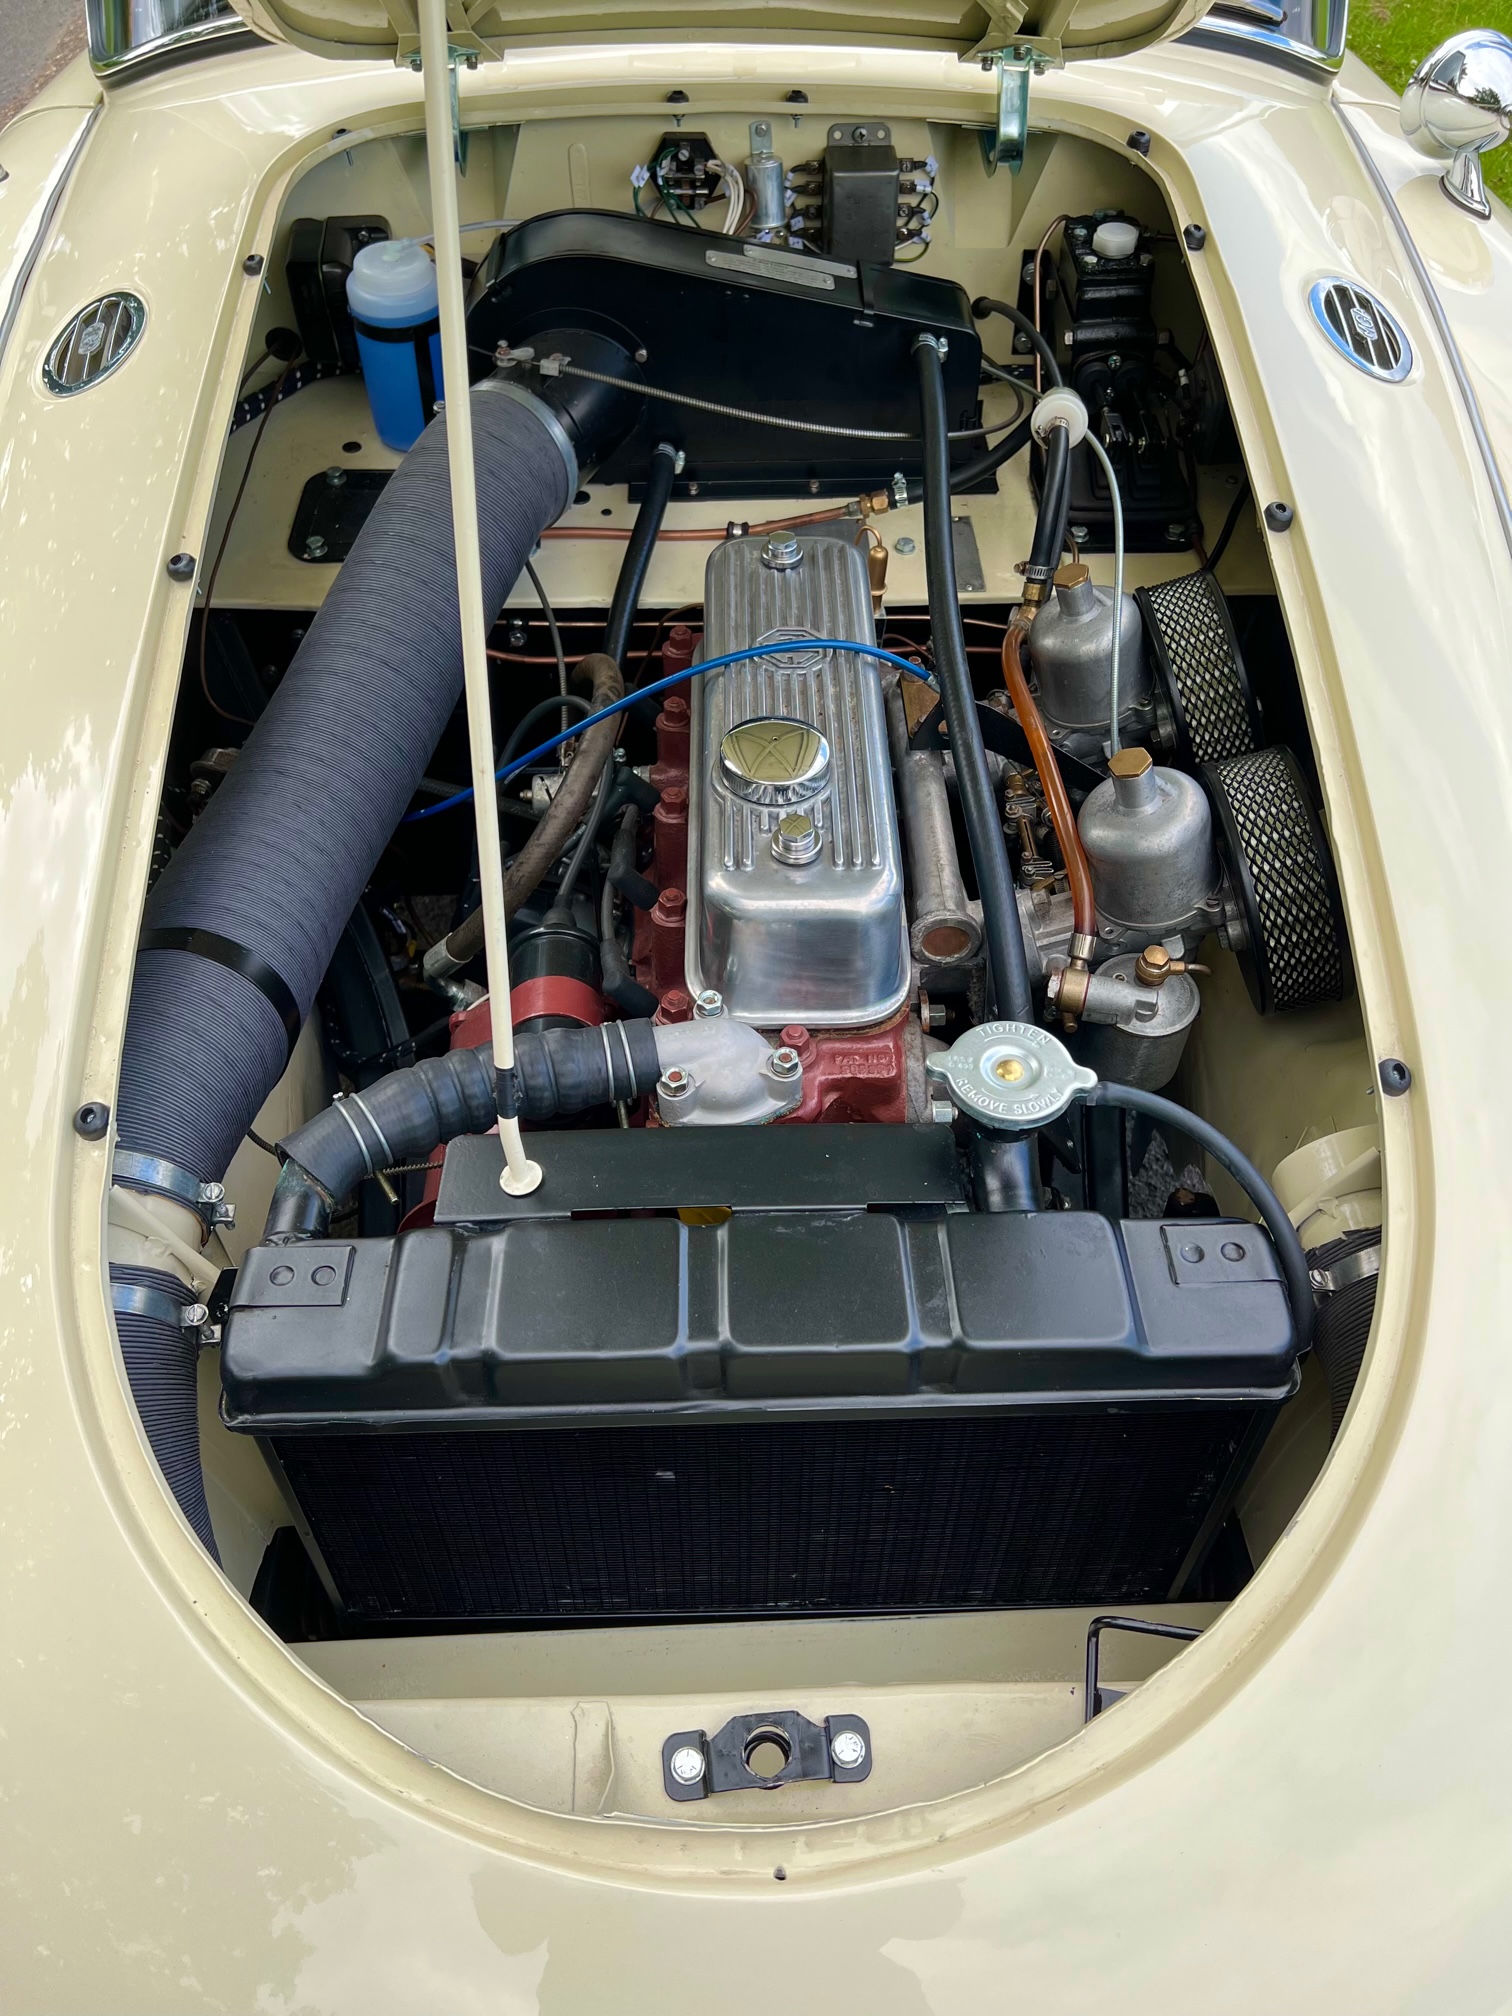 1958 MGA 1500 Coupe for sale by classified listing privately in 